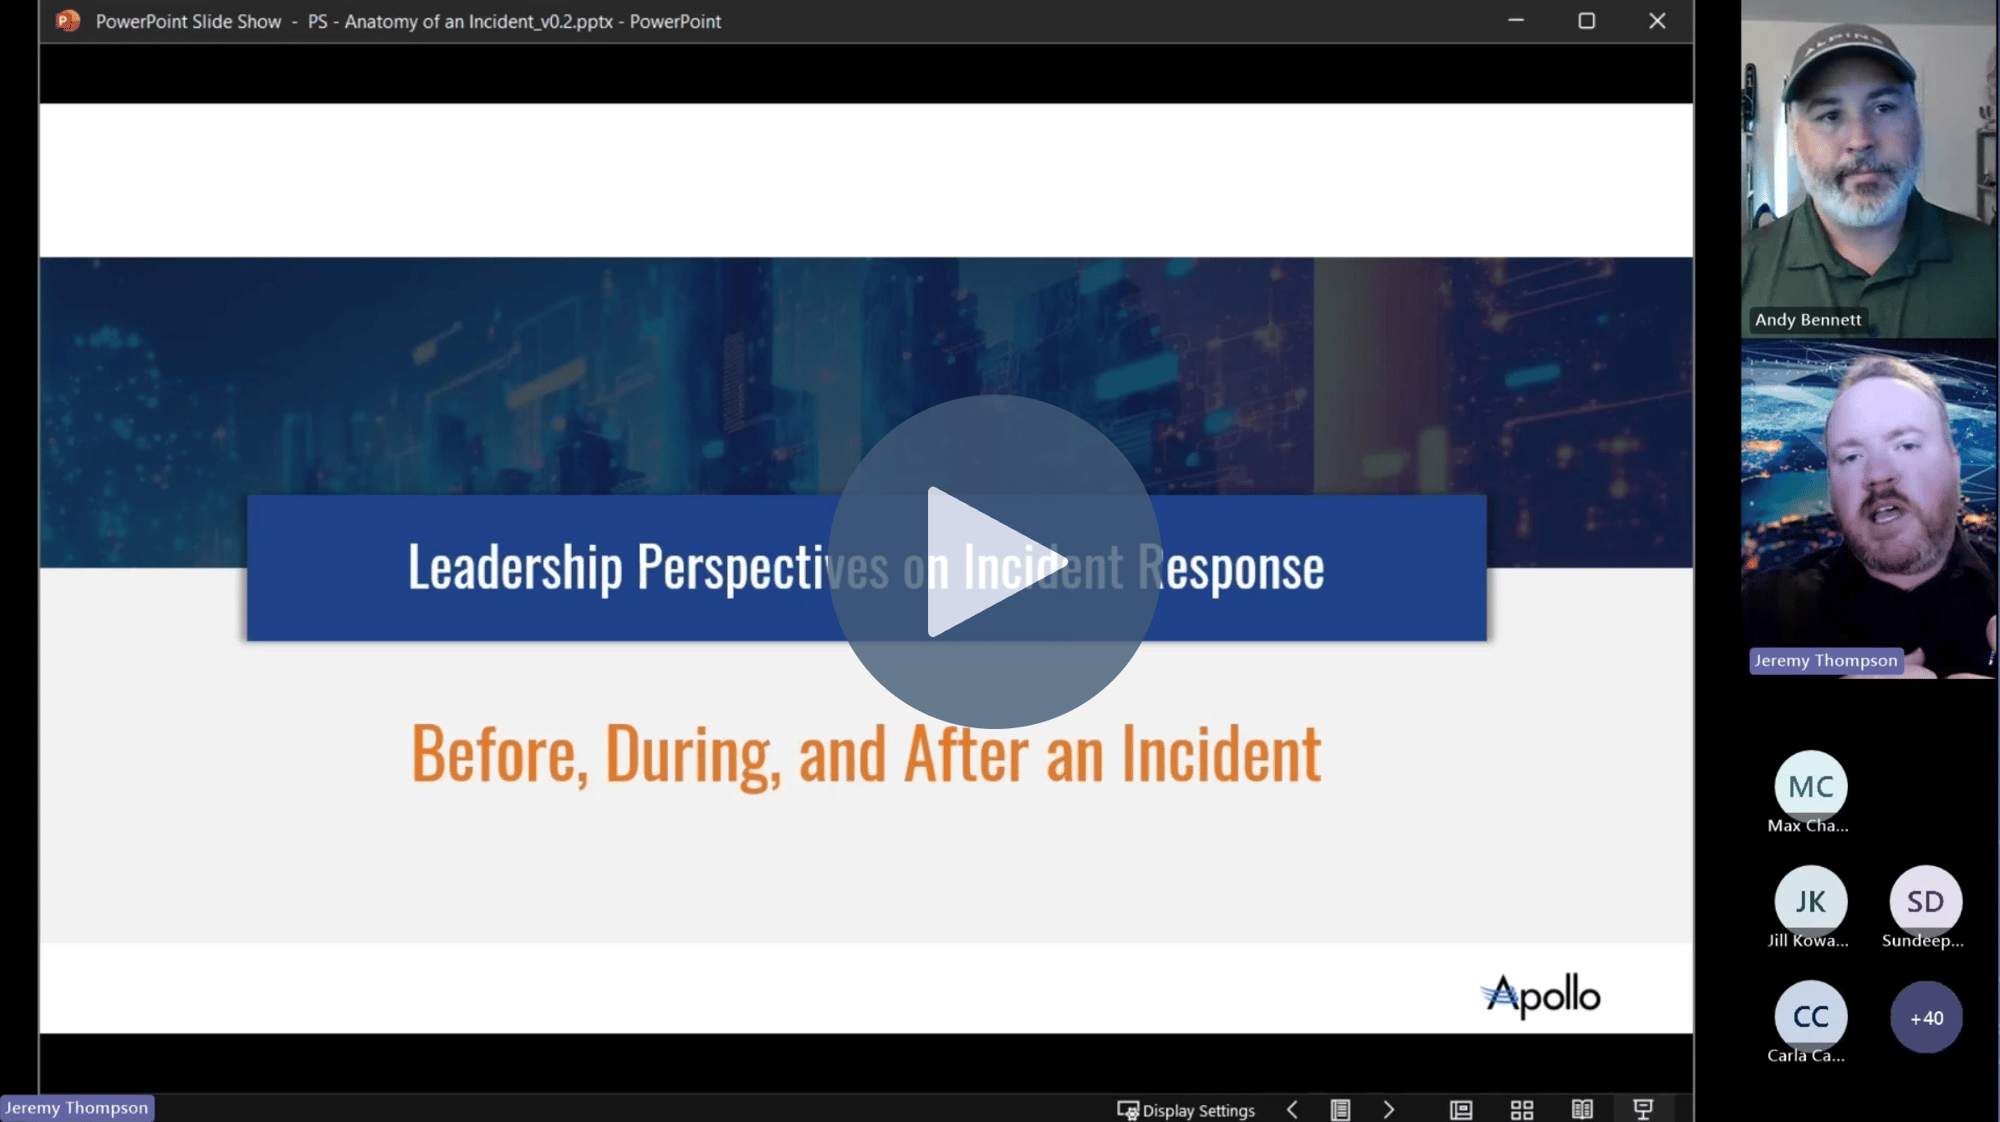 Anatomy of an Incident Response